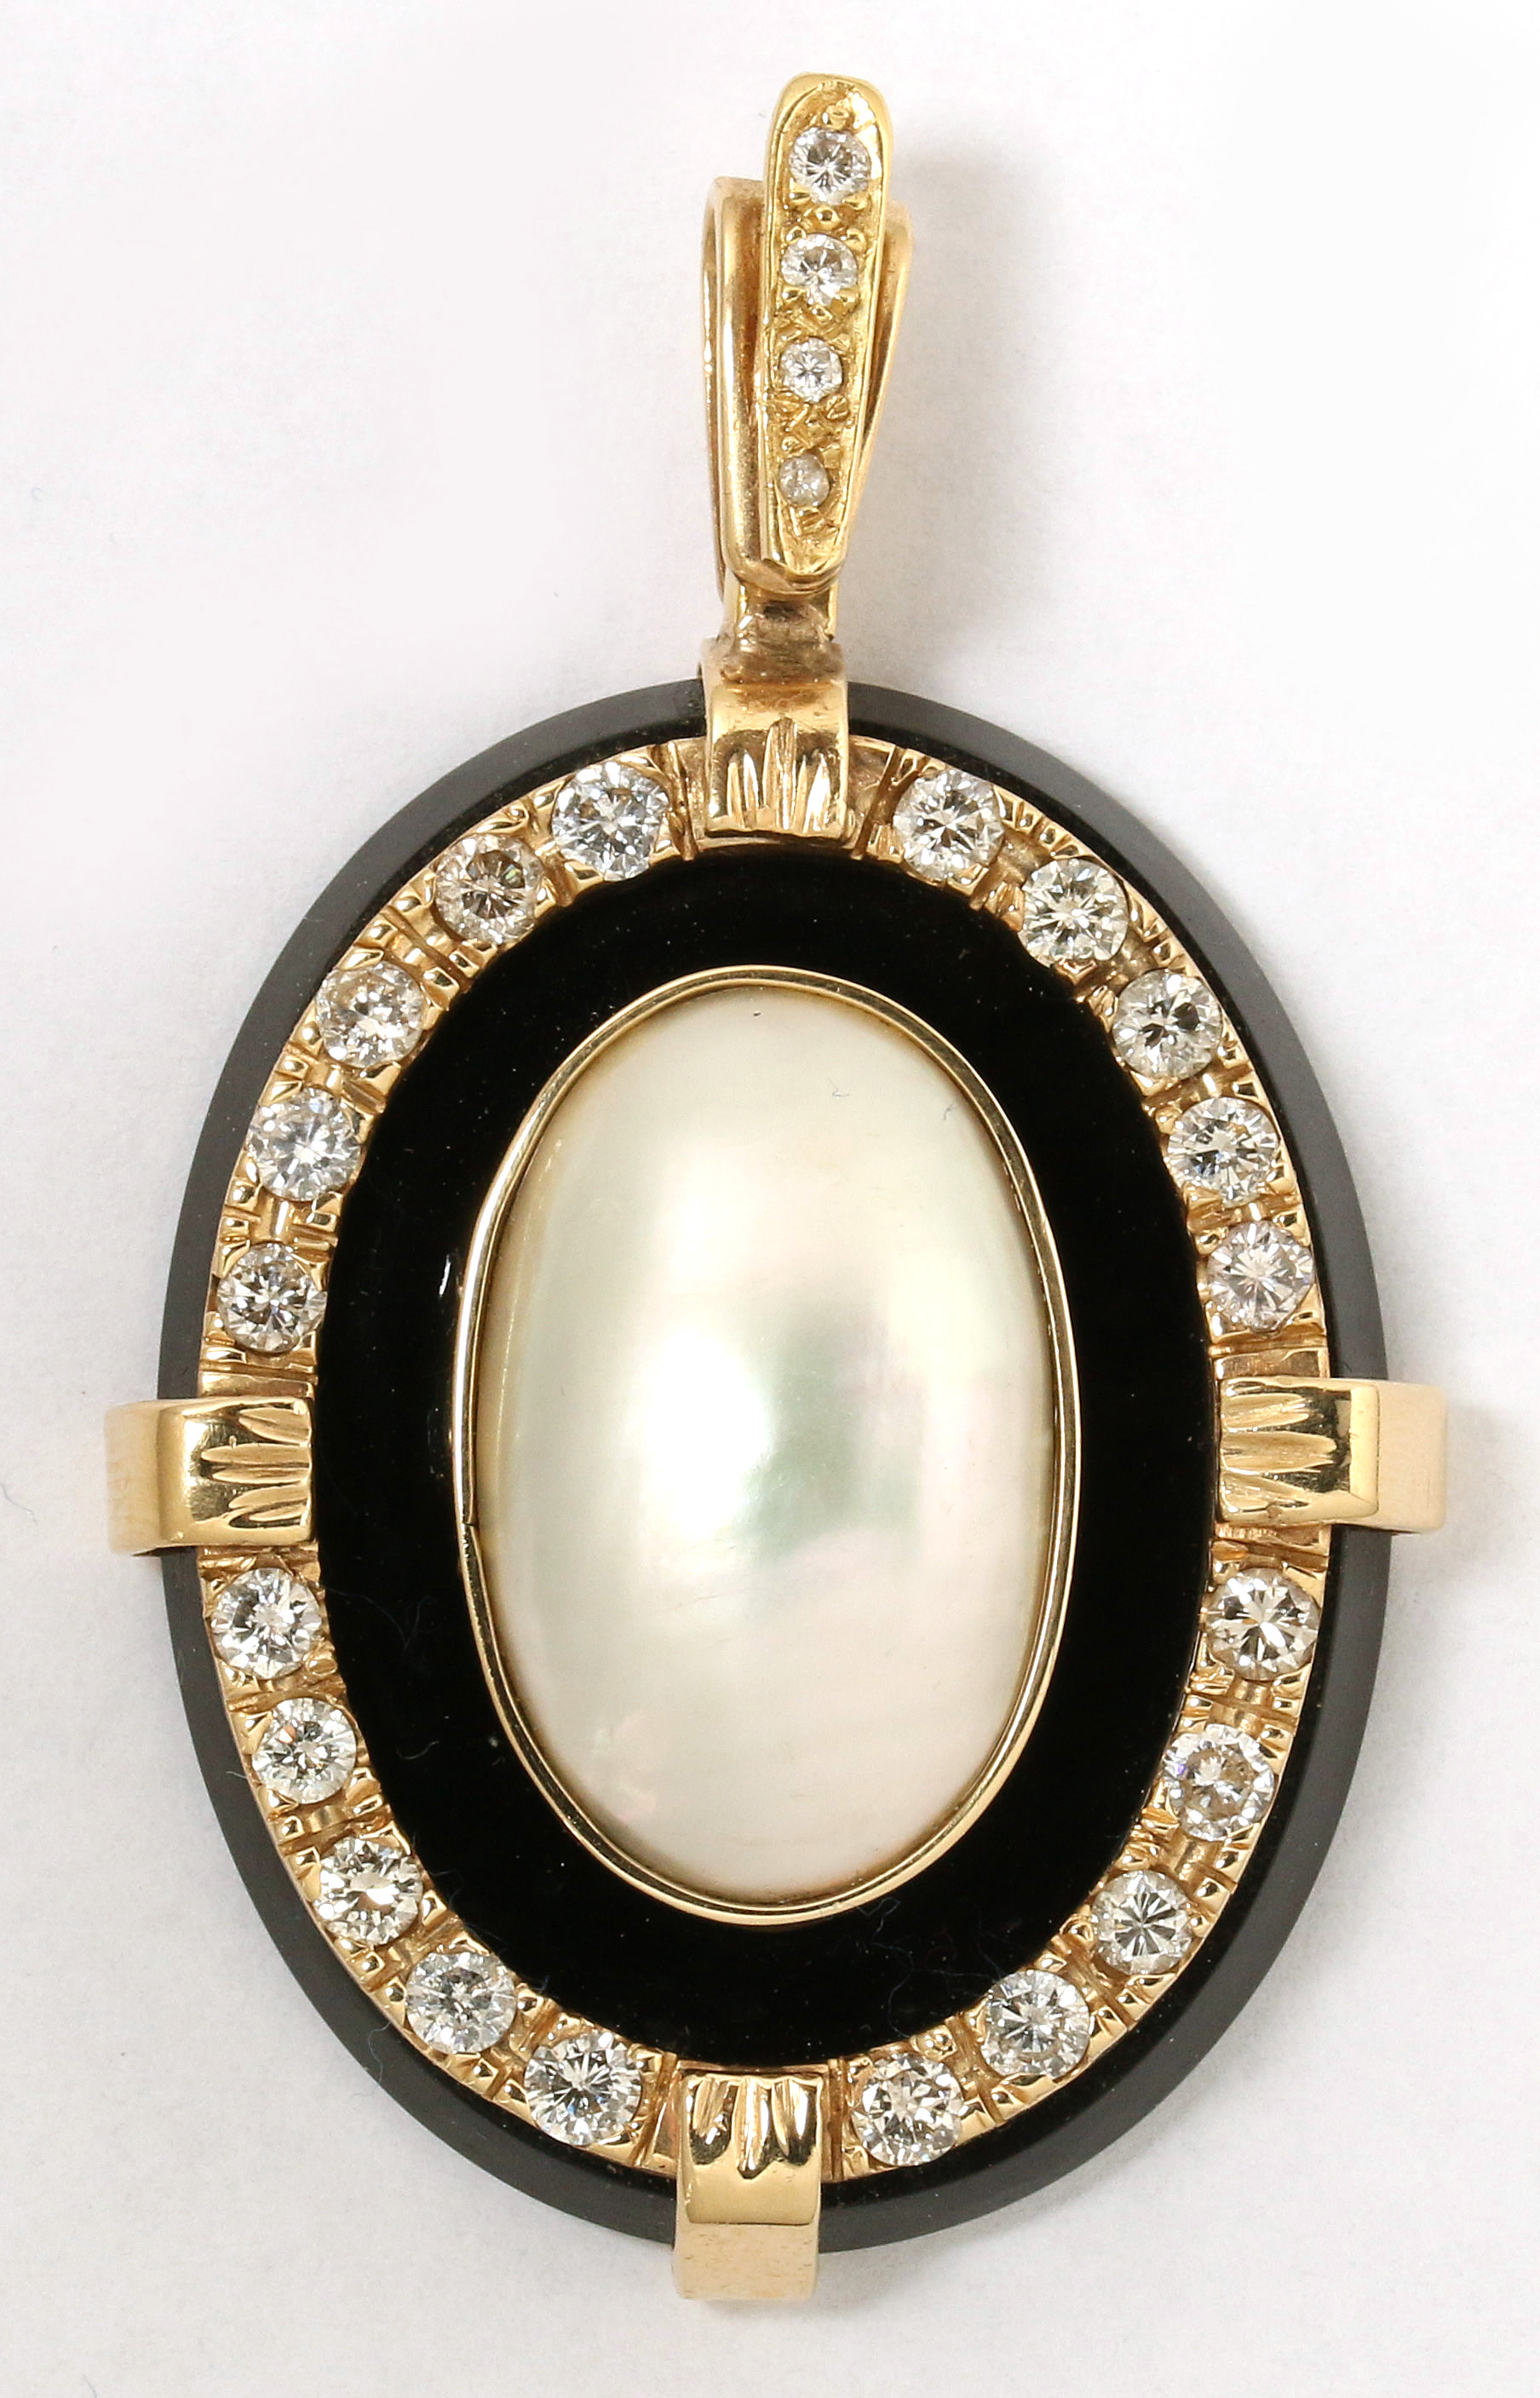 A 14K YELLOW GOLD DIAMOND, ONYX AND PEARL PENDANT